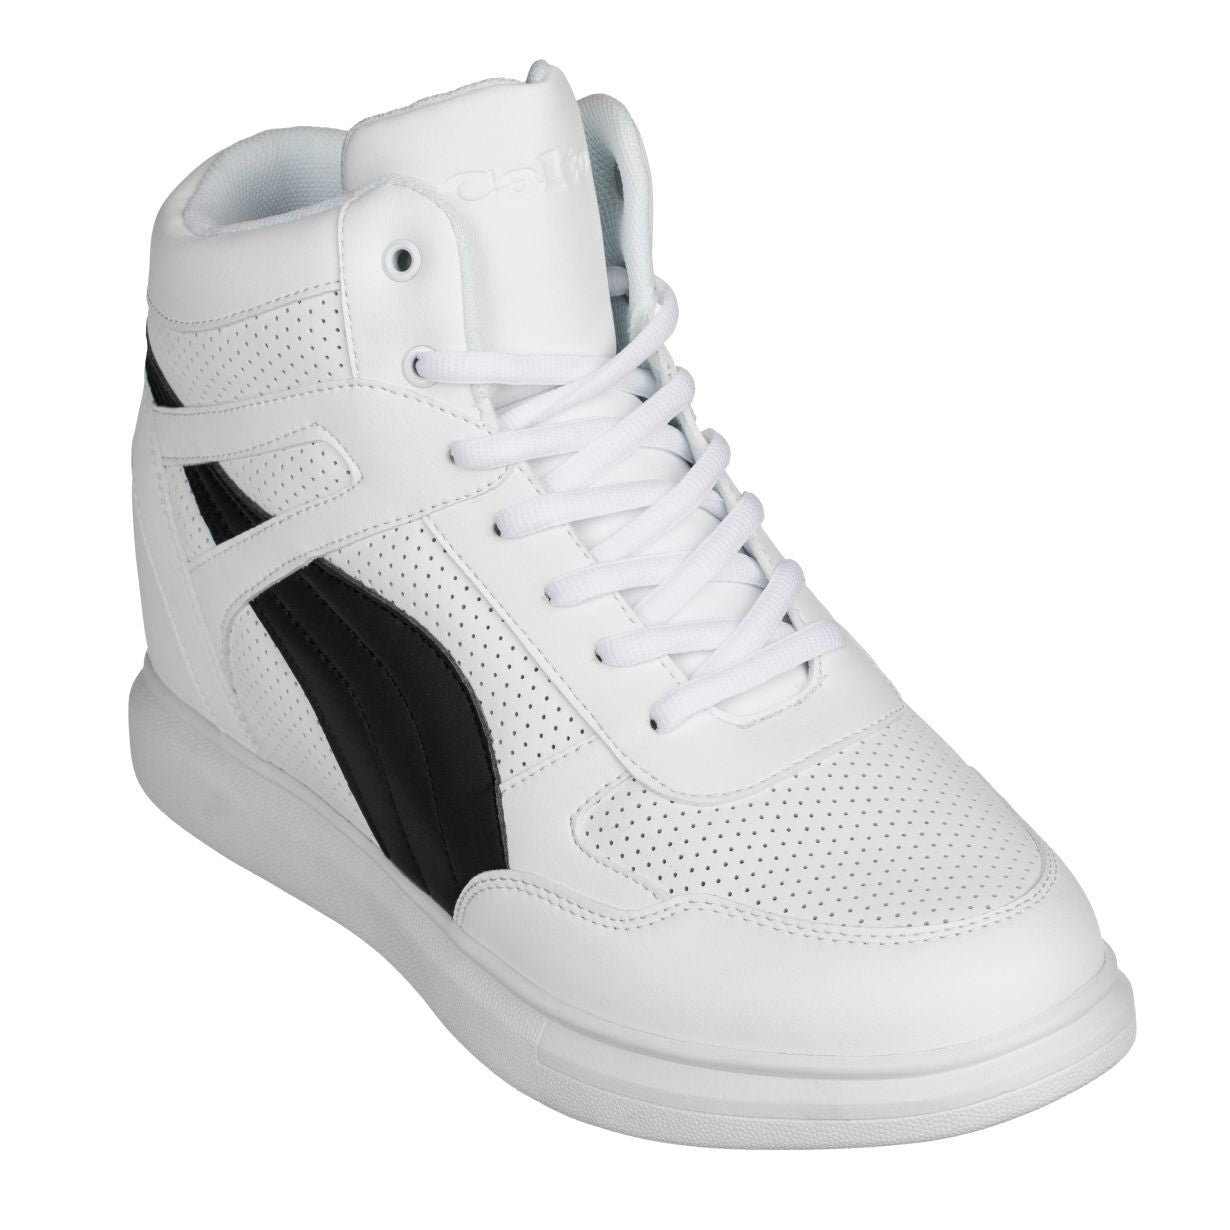 Elevator shoes height increase CALTO - H71903 - 3.8 Inches Taller (White/Black)